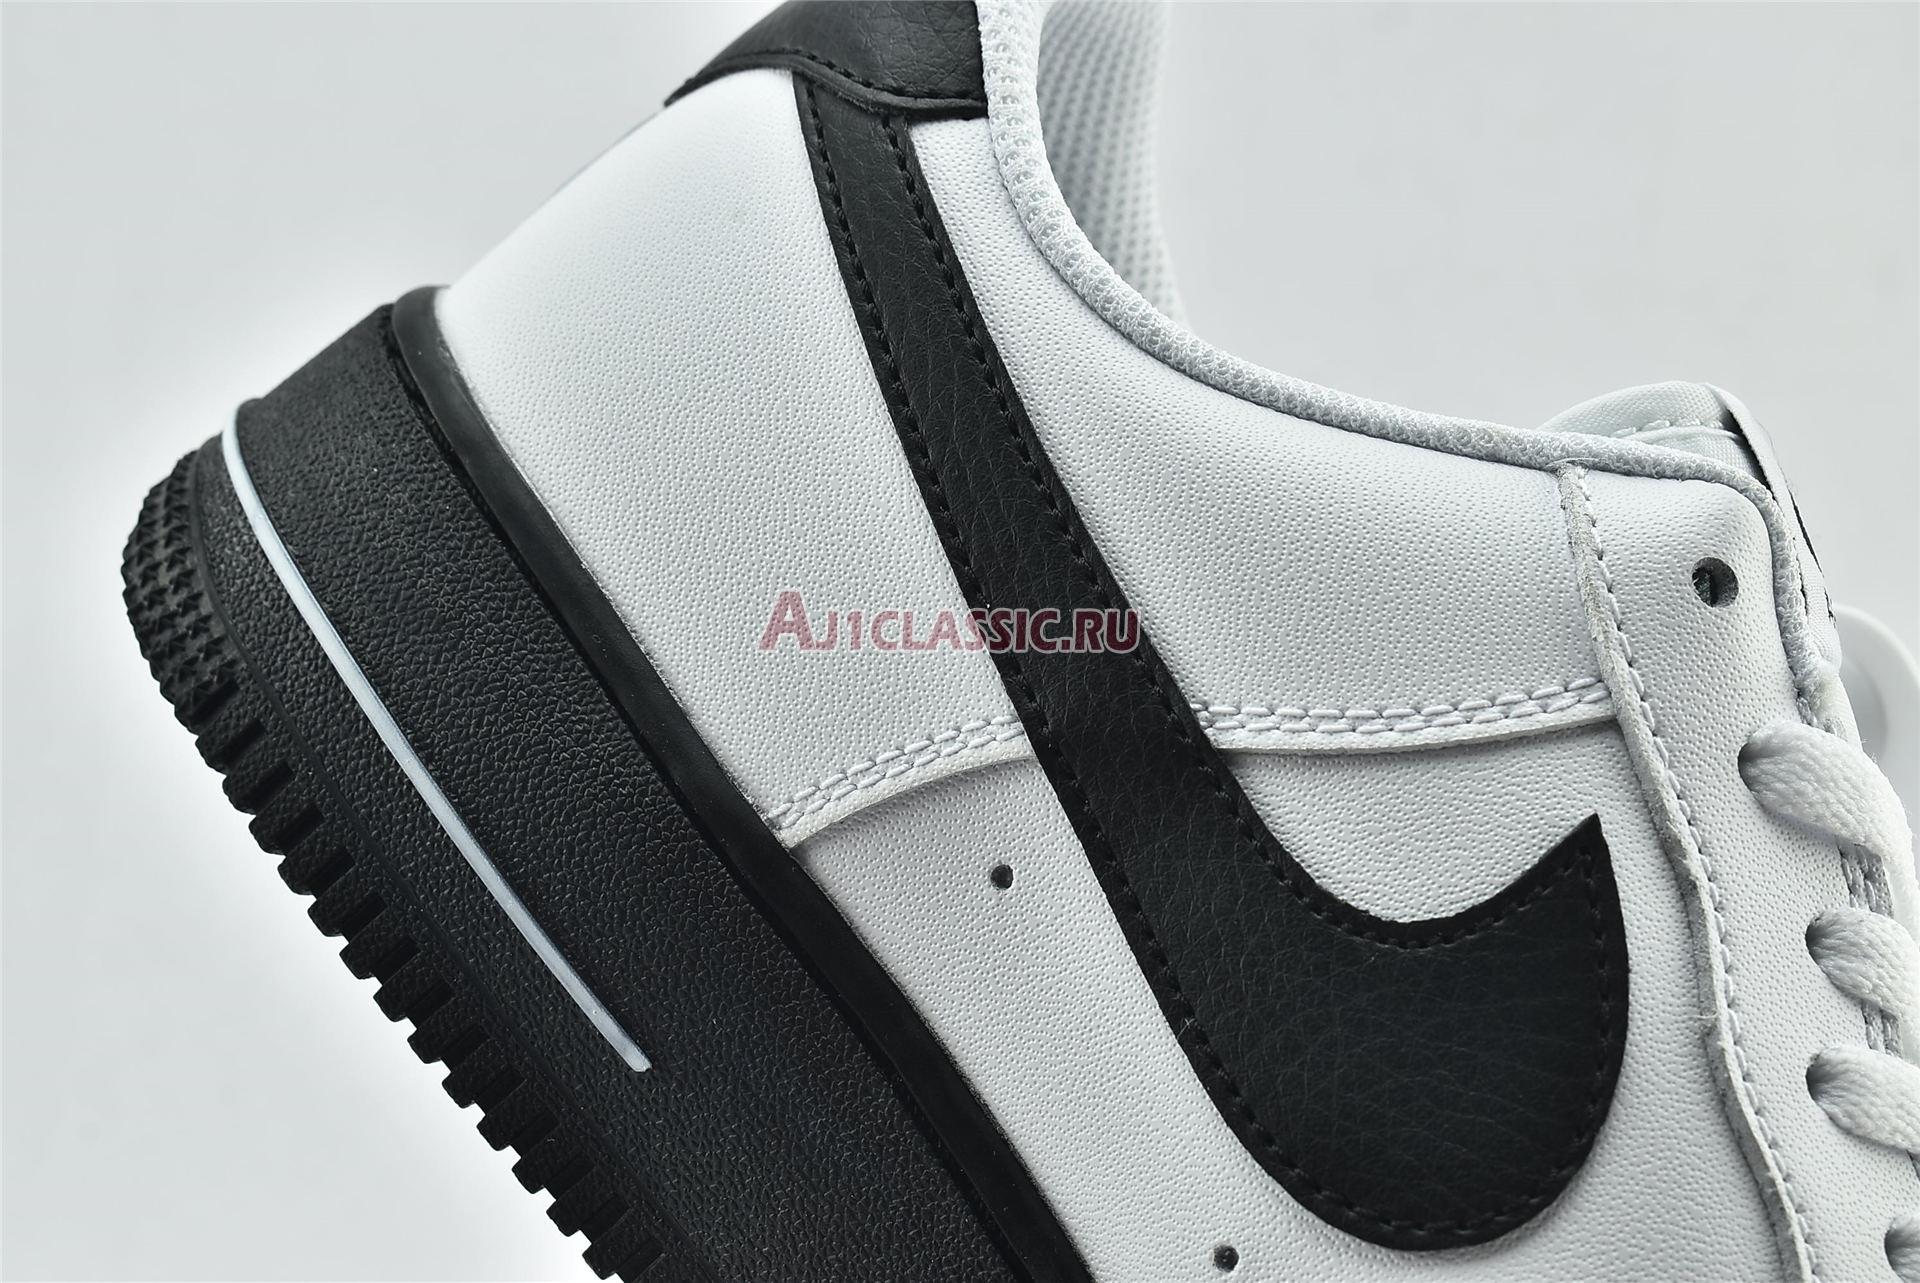 Nike Air Force 1 Low "White Black Sole" CK7663-101